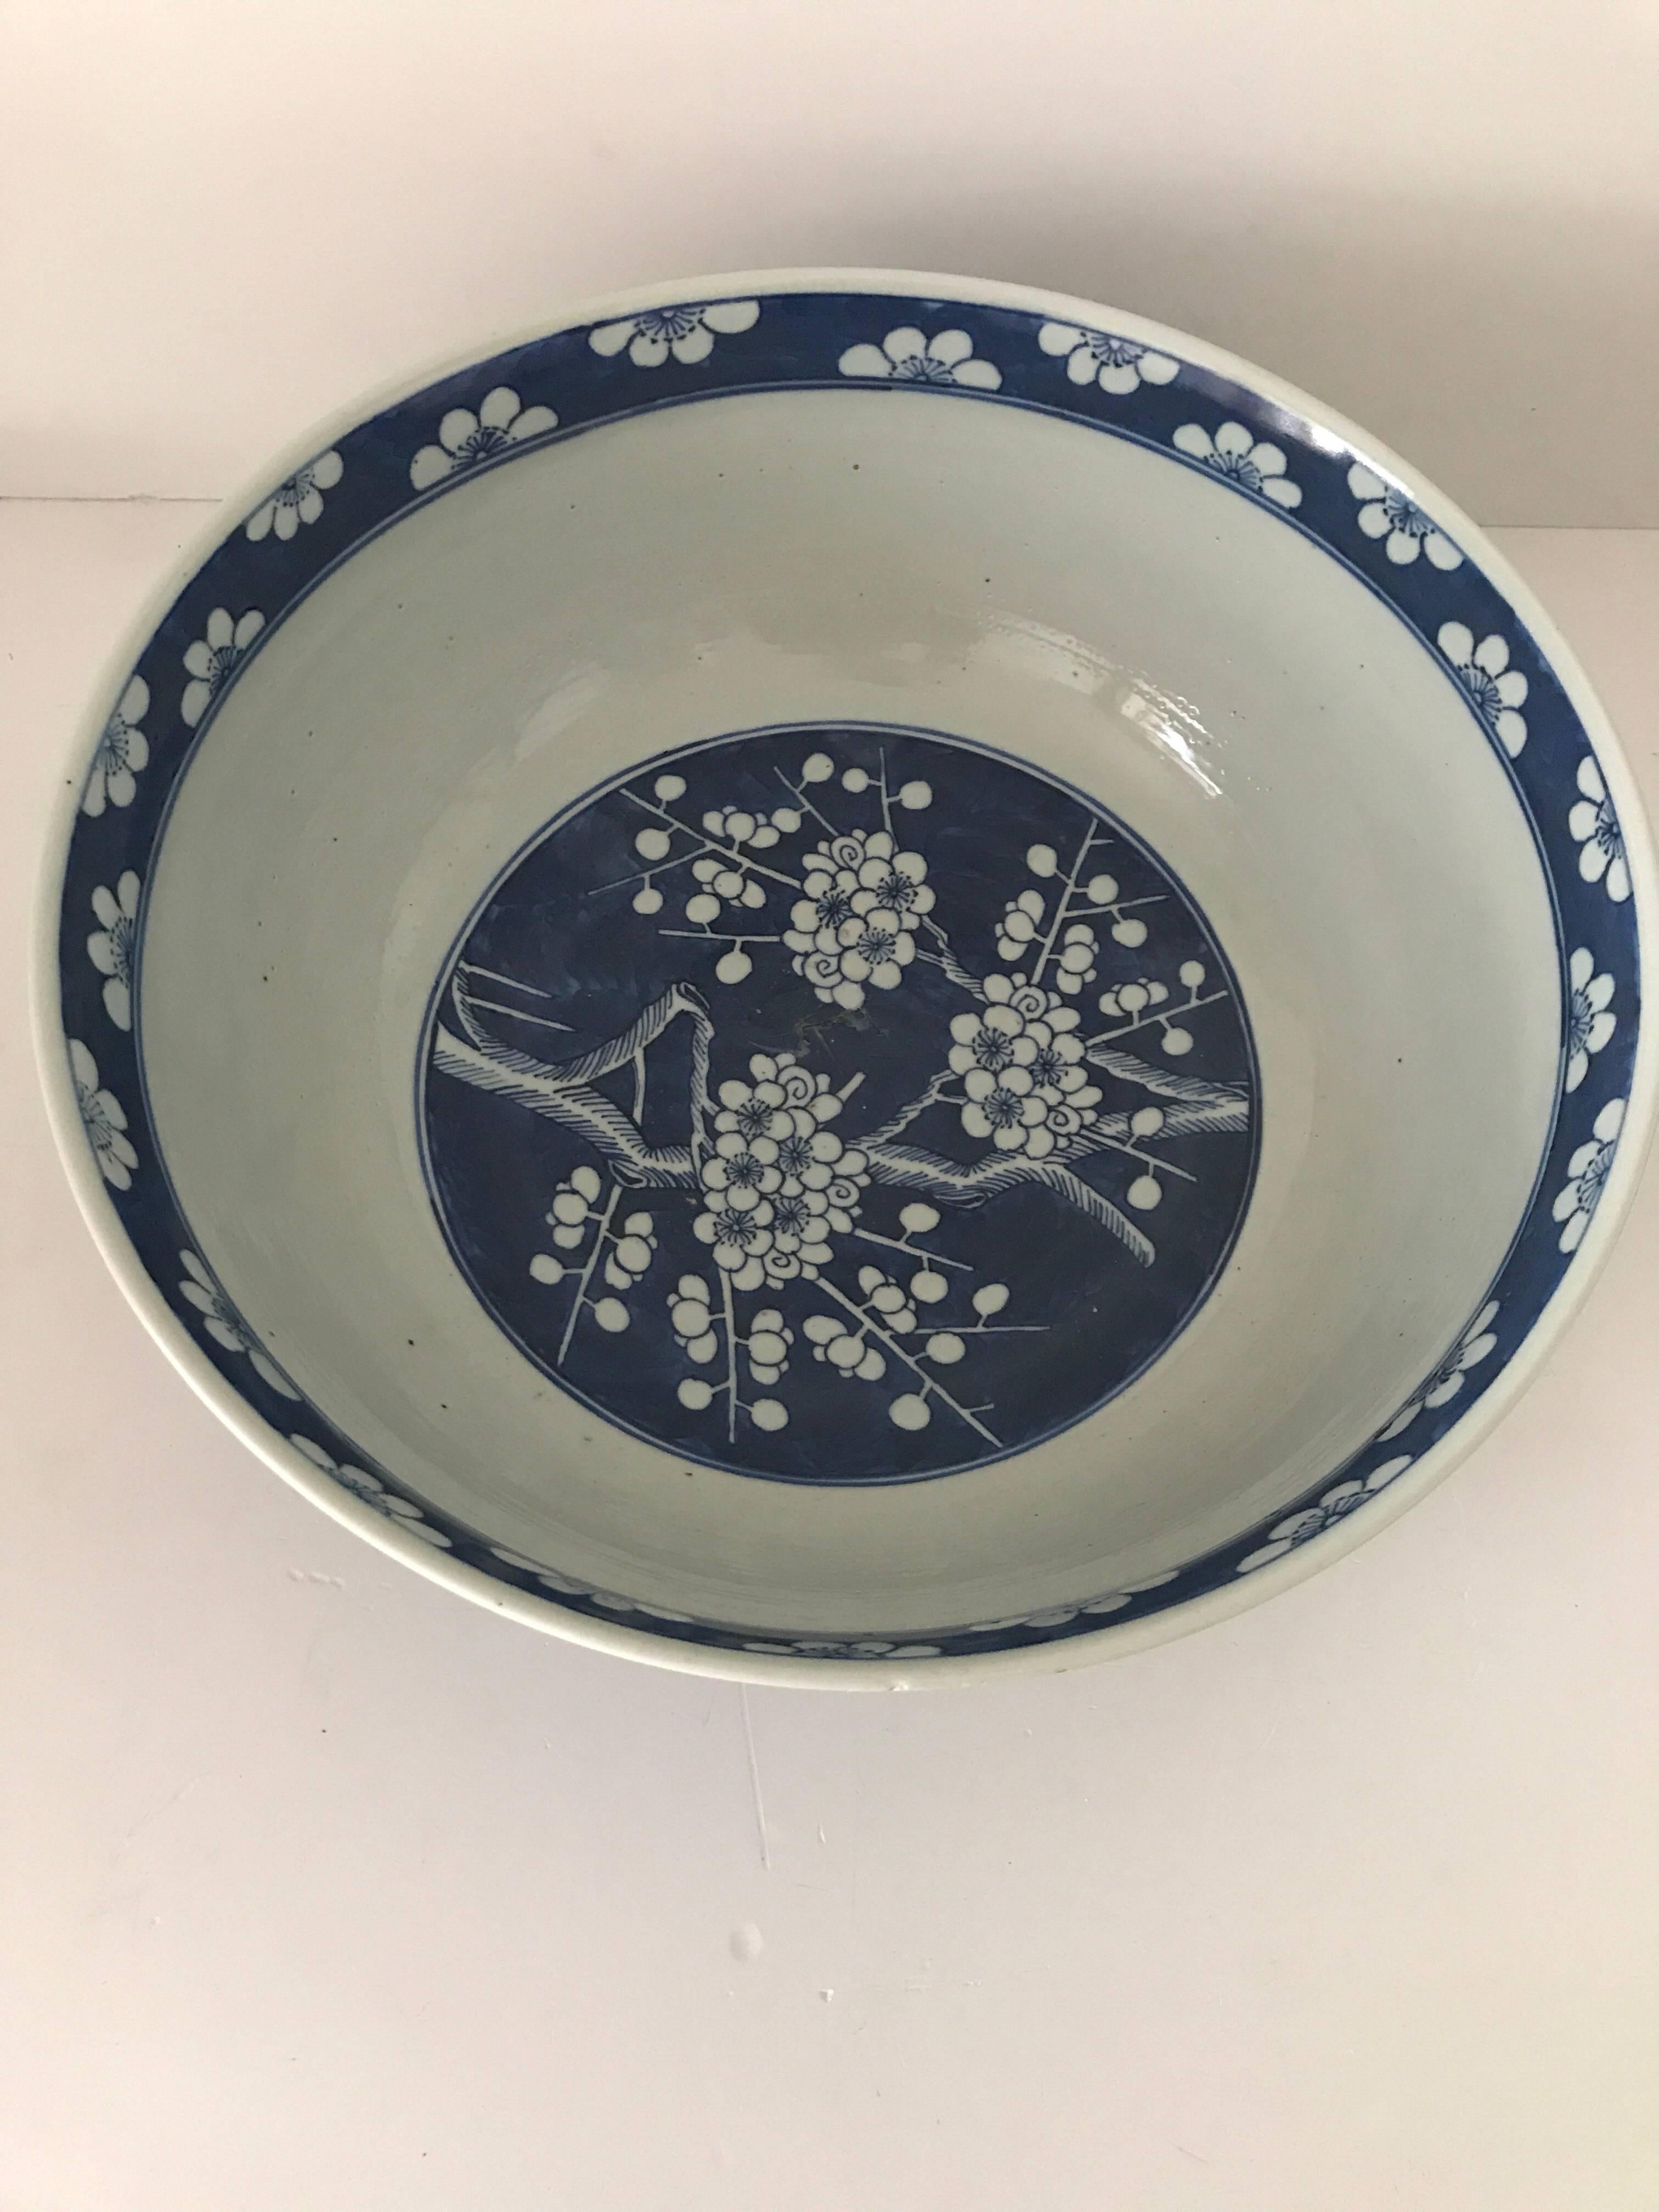 Very large punch Chinese 19th century blue and white porcelain punch bowl. 
The bowl is painted in a Kangxi style and is extremely large and the diameter is 40 cm, the height is 16.5 cm. 
The condition is good but there has is a star crack to the